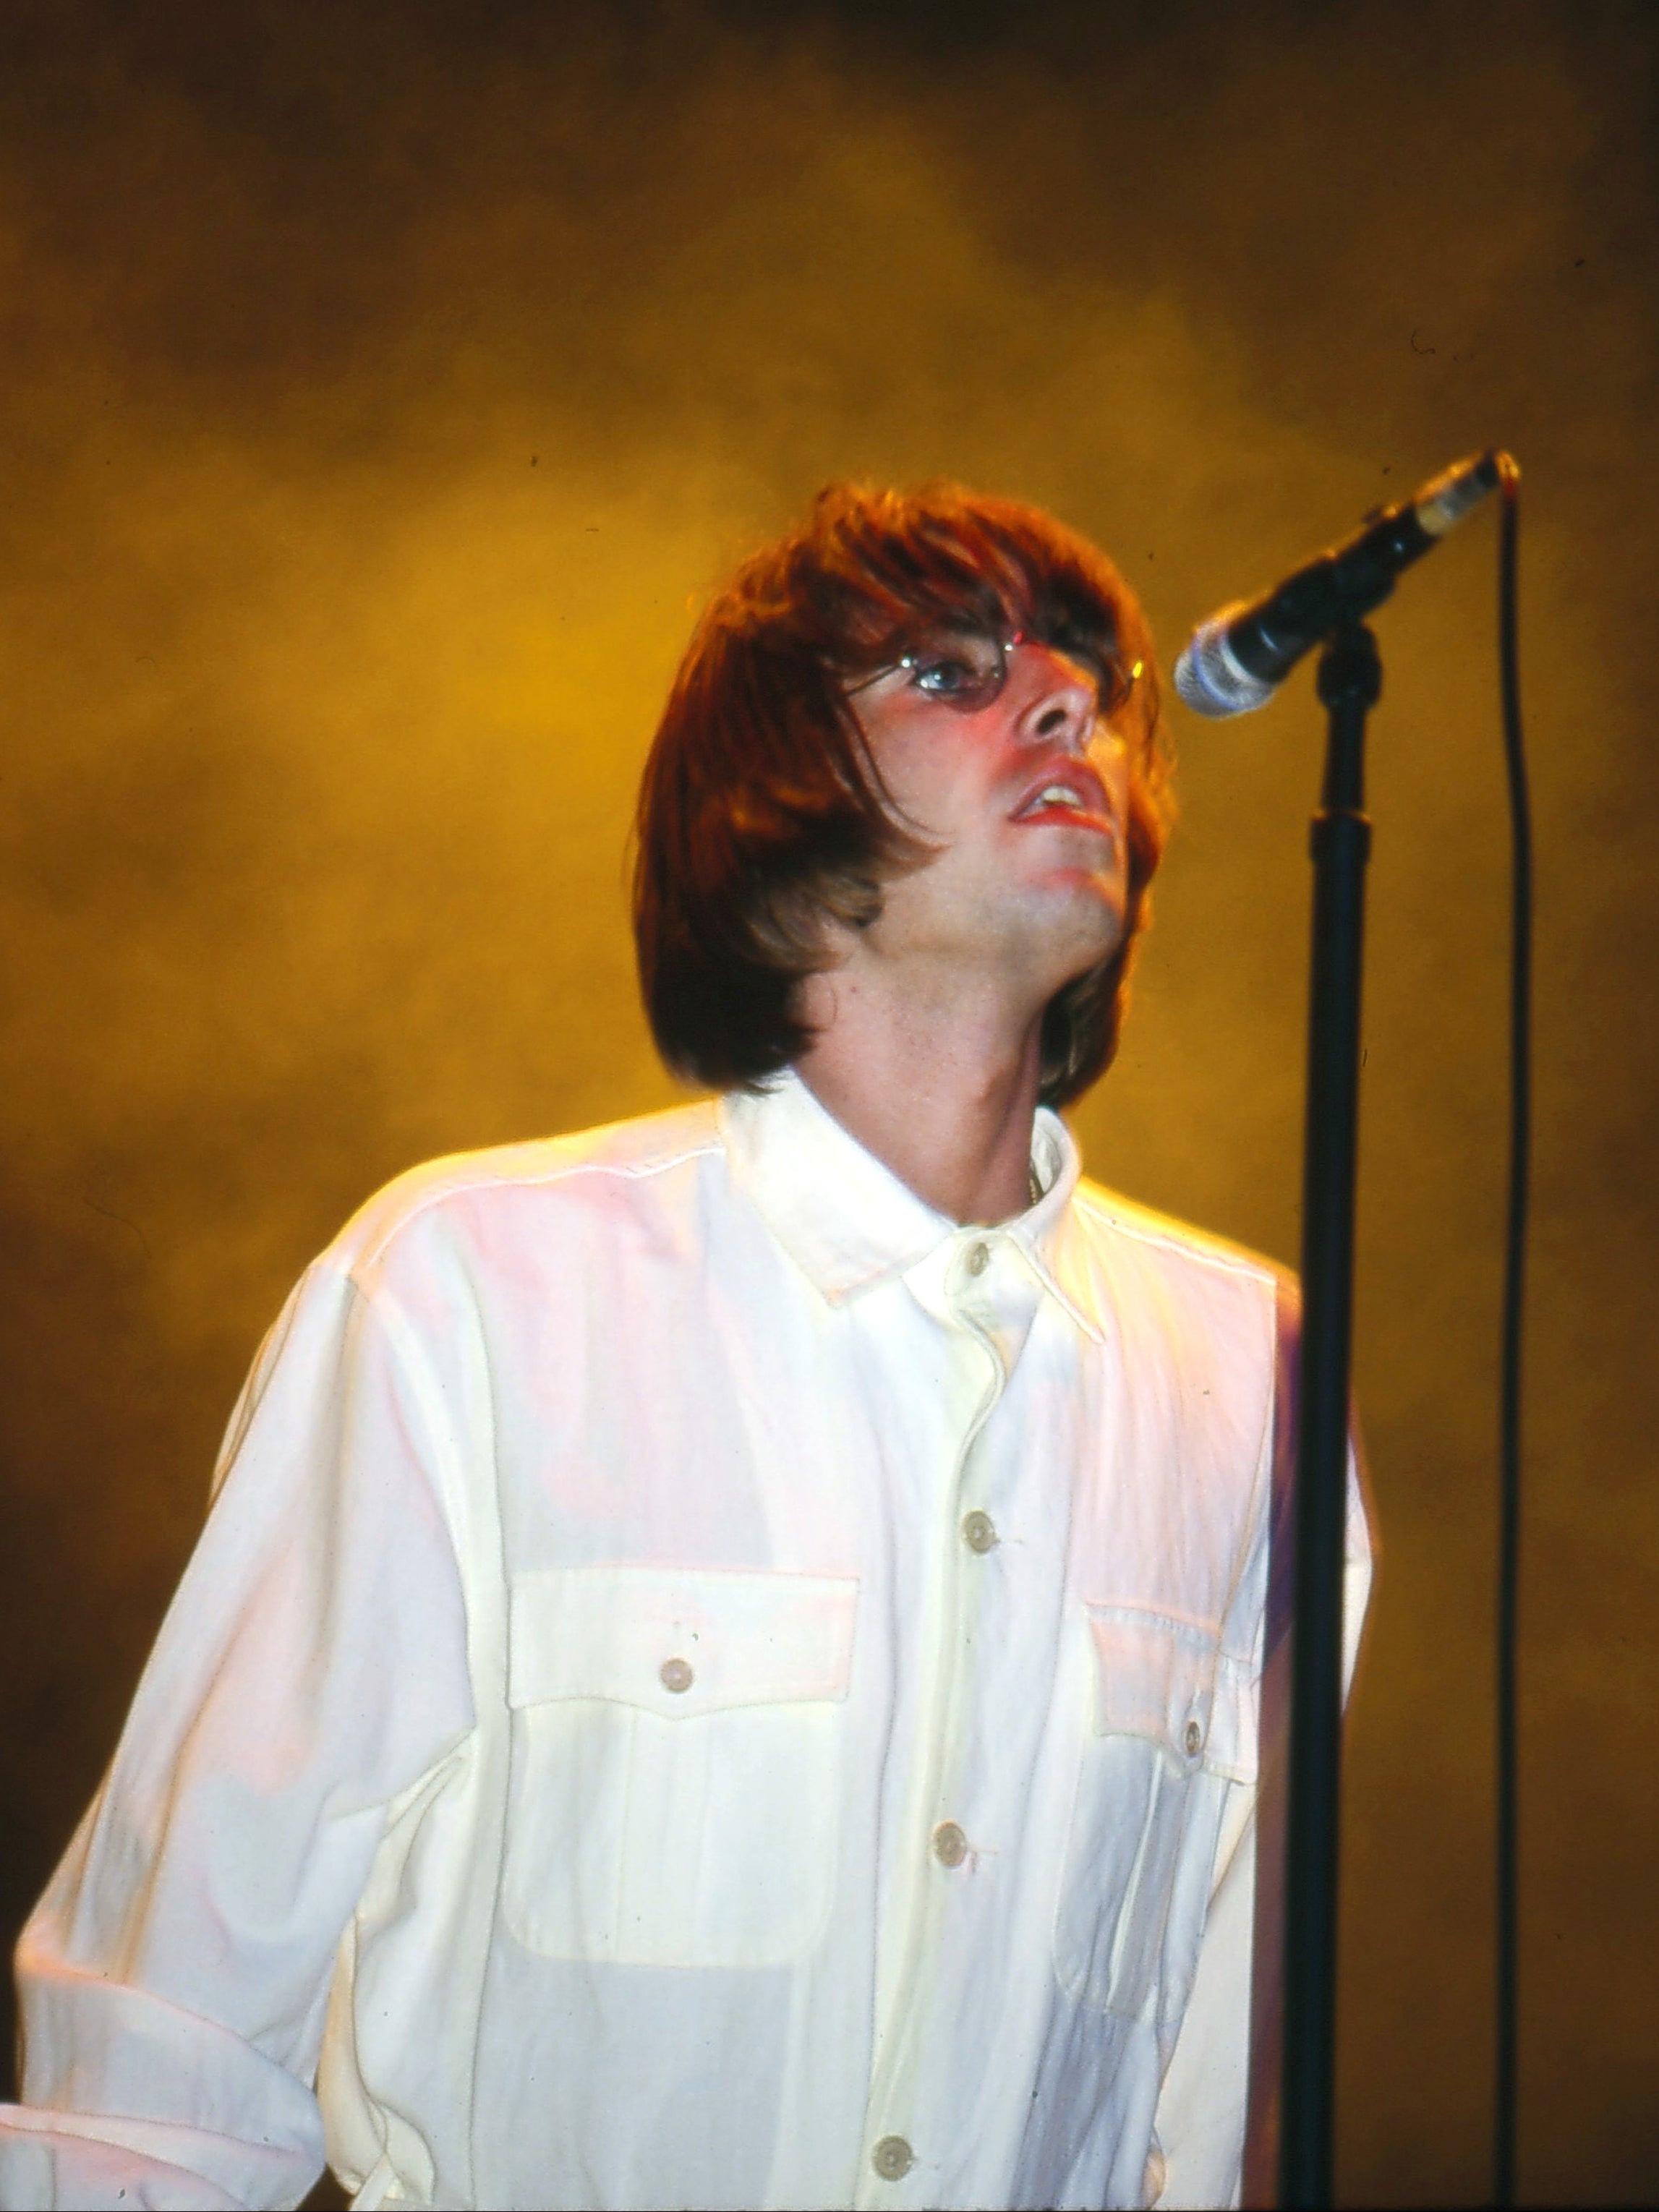 Remembering Oasis's historic Knebworth shows of '96: 'It was at